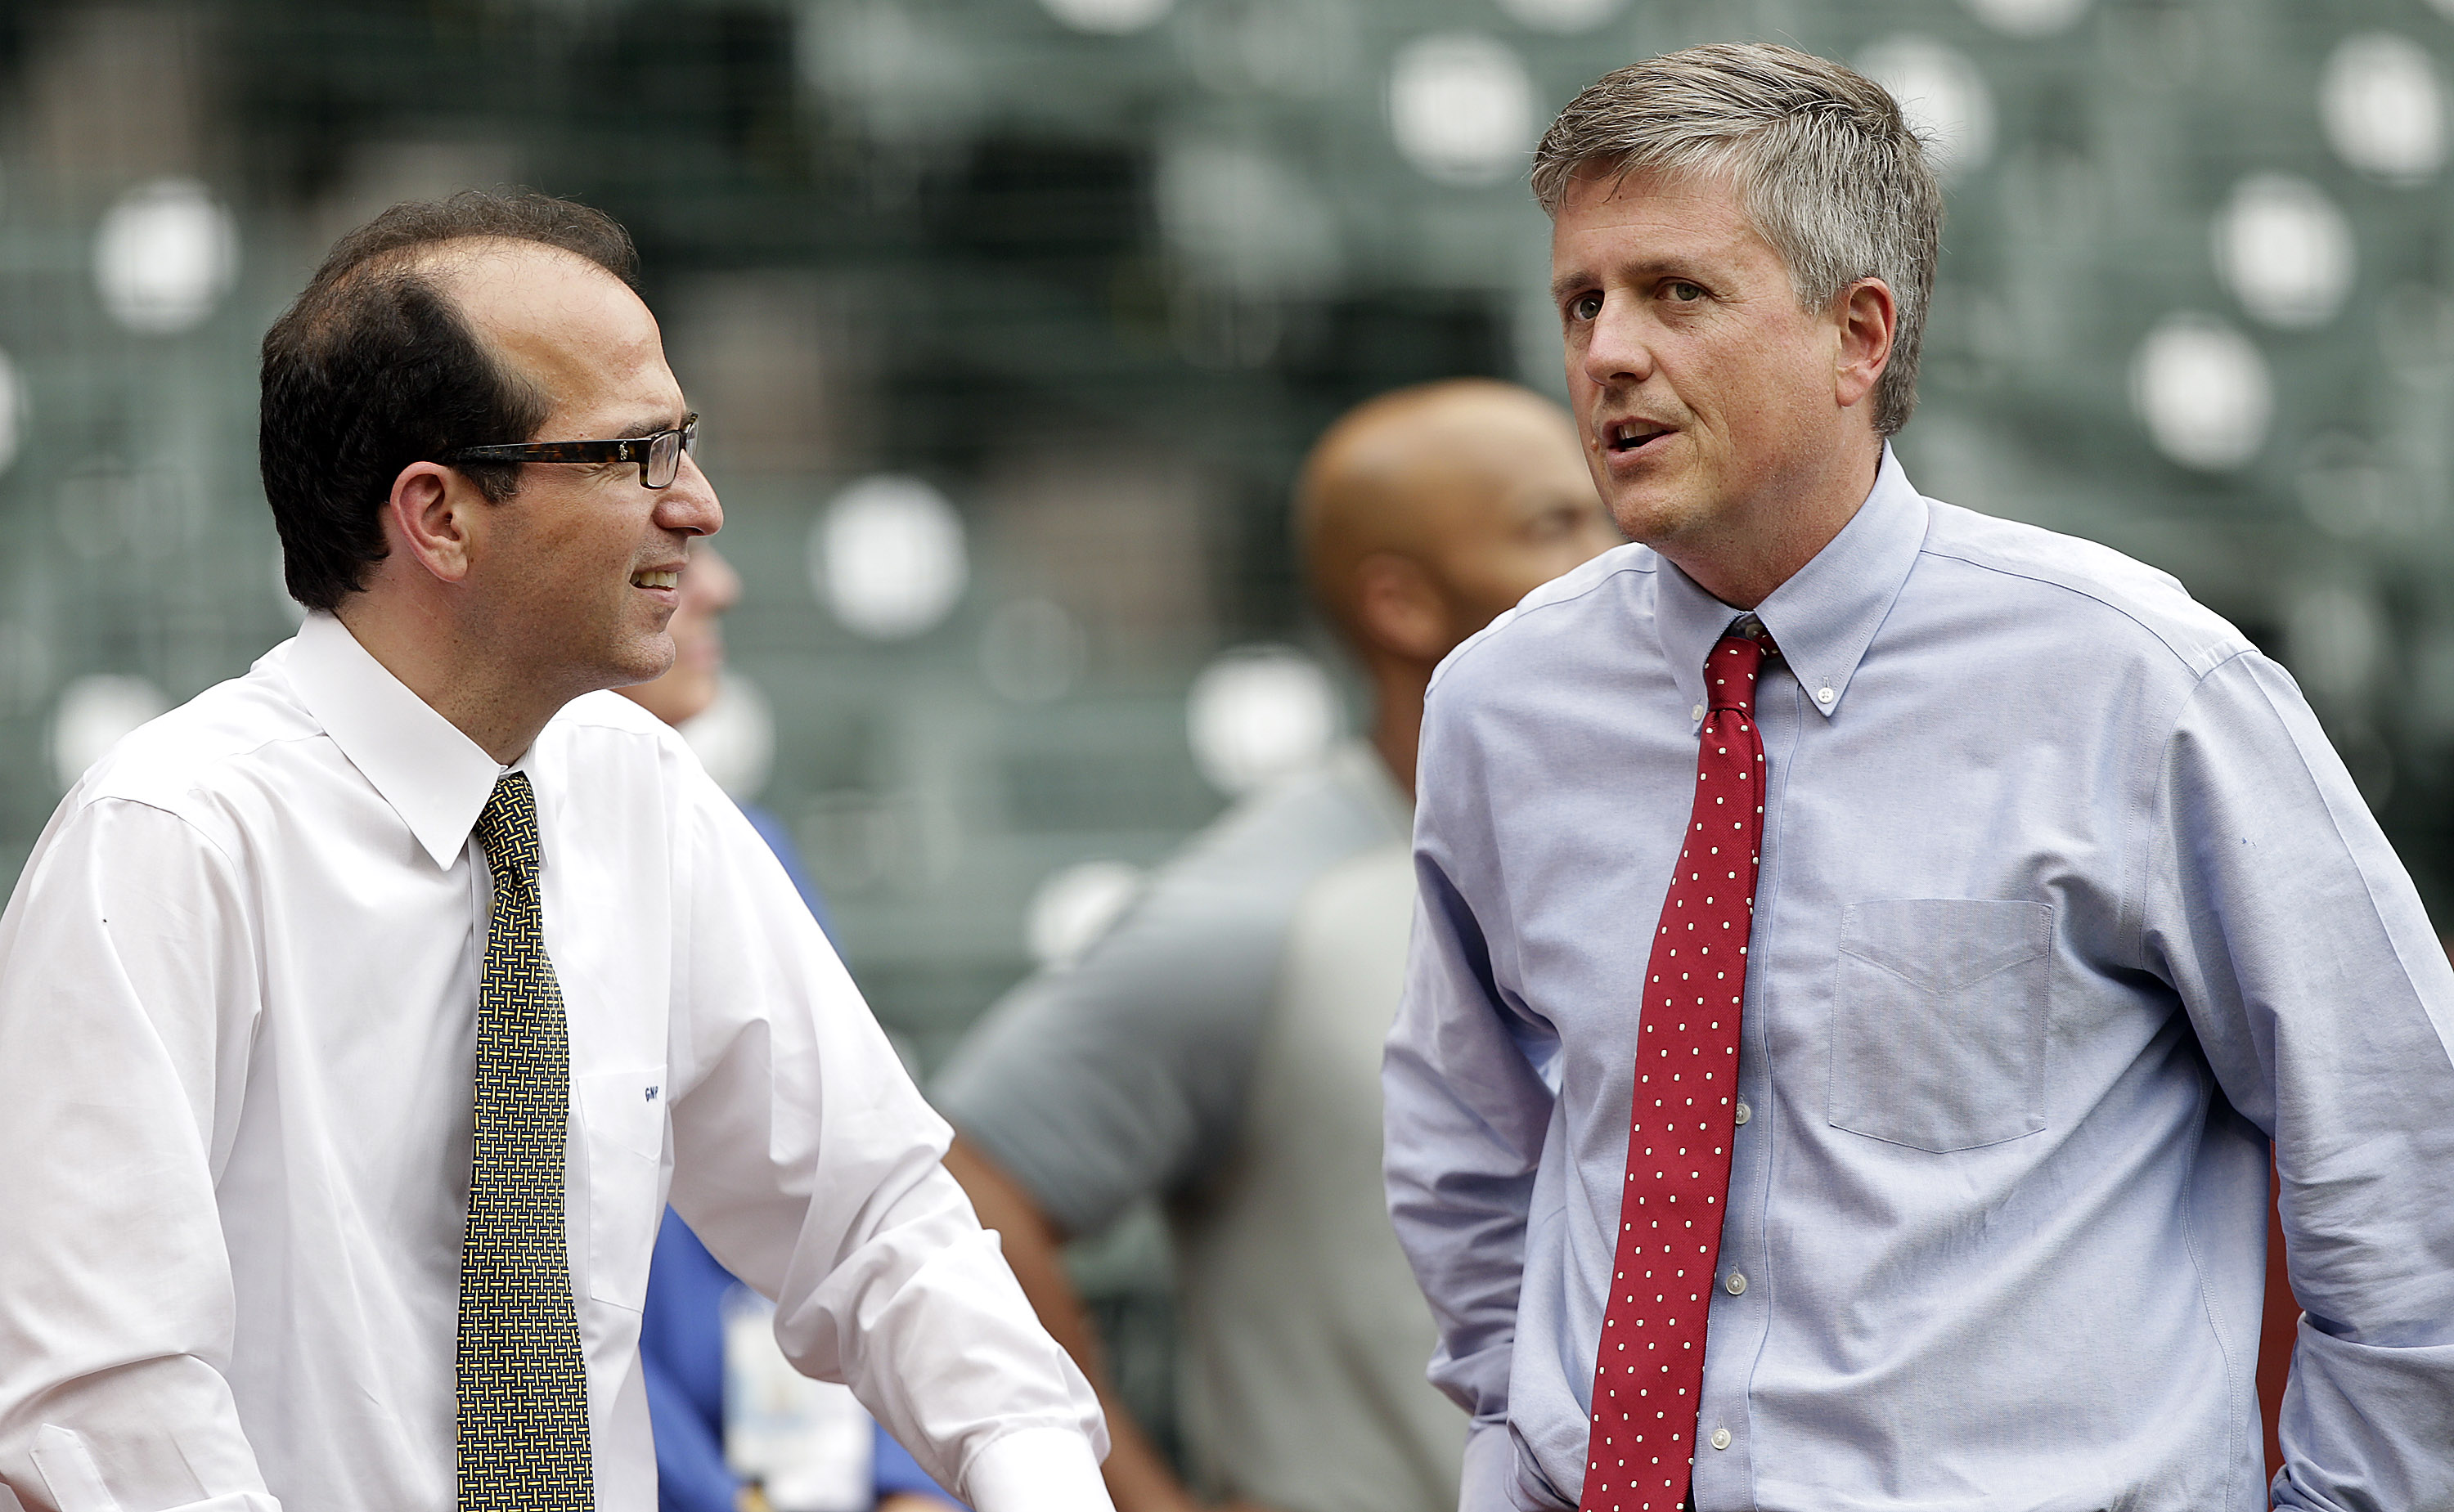 Houston Astros general manager Jeff Luhnow, right, and team president George Postolos talk during batting practice before a game between the New York Mets and Houston Astros on May 1, 2012. (Getty)